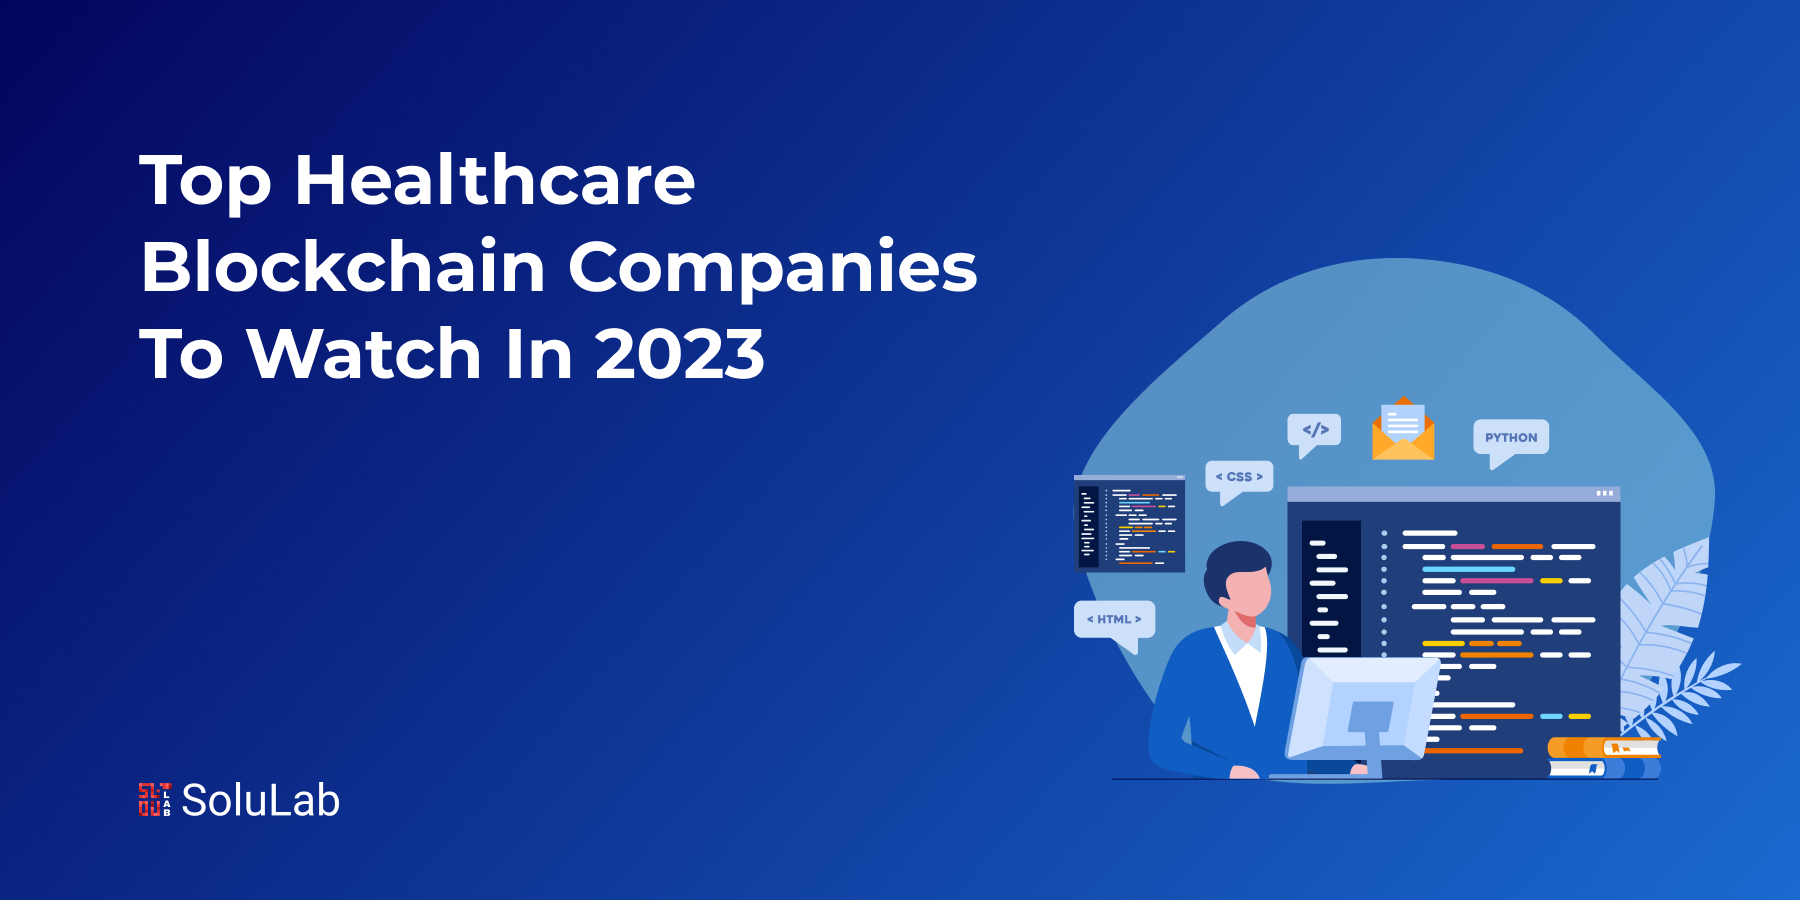 Top Healthcare Blockchain Companies to Watch in 2023